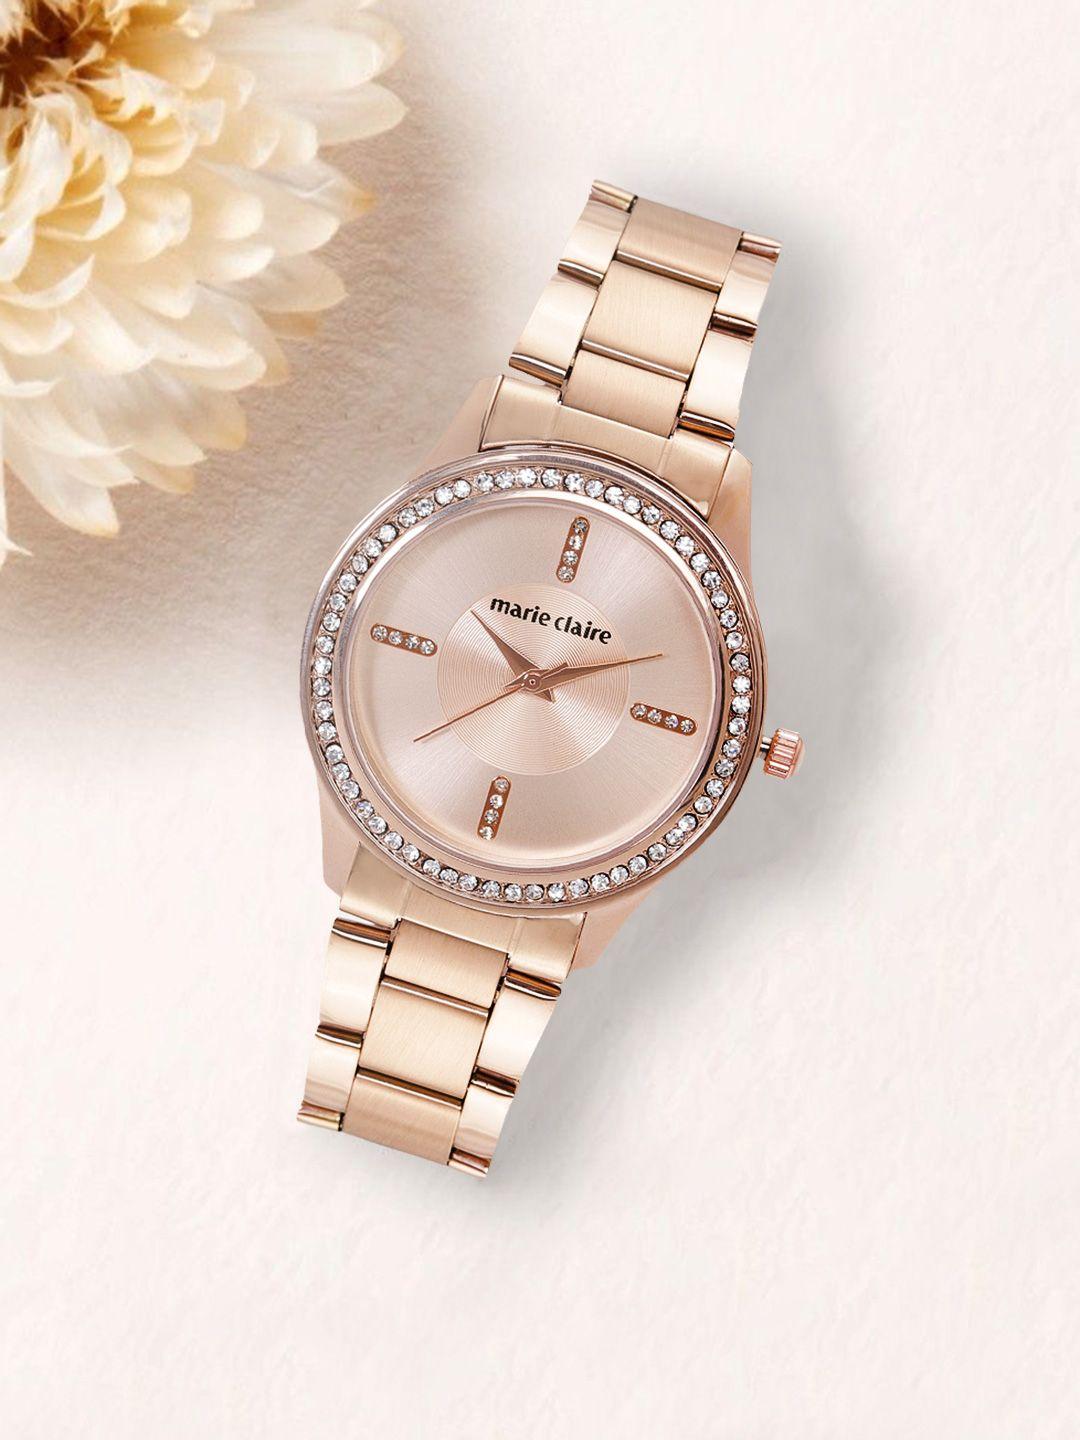 marie claire women rose gold-toned analogue watch mc 7a-a